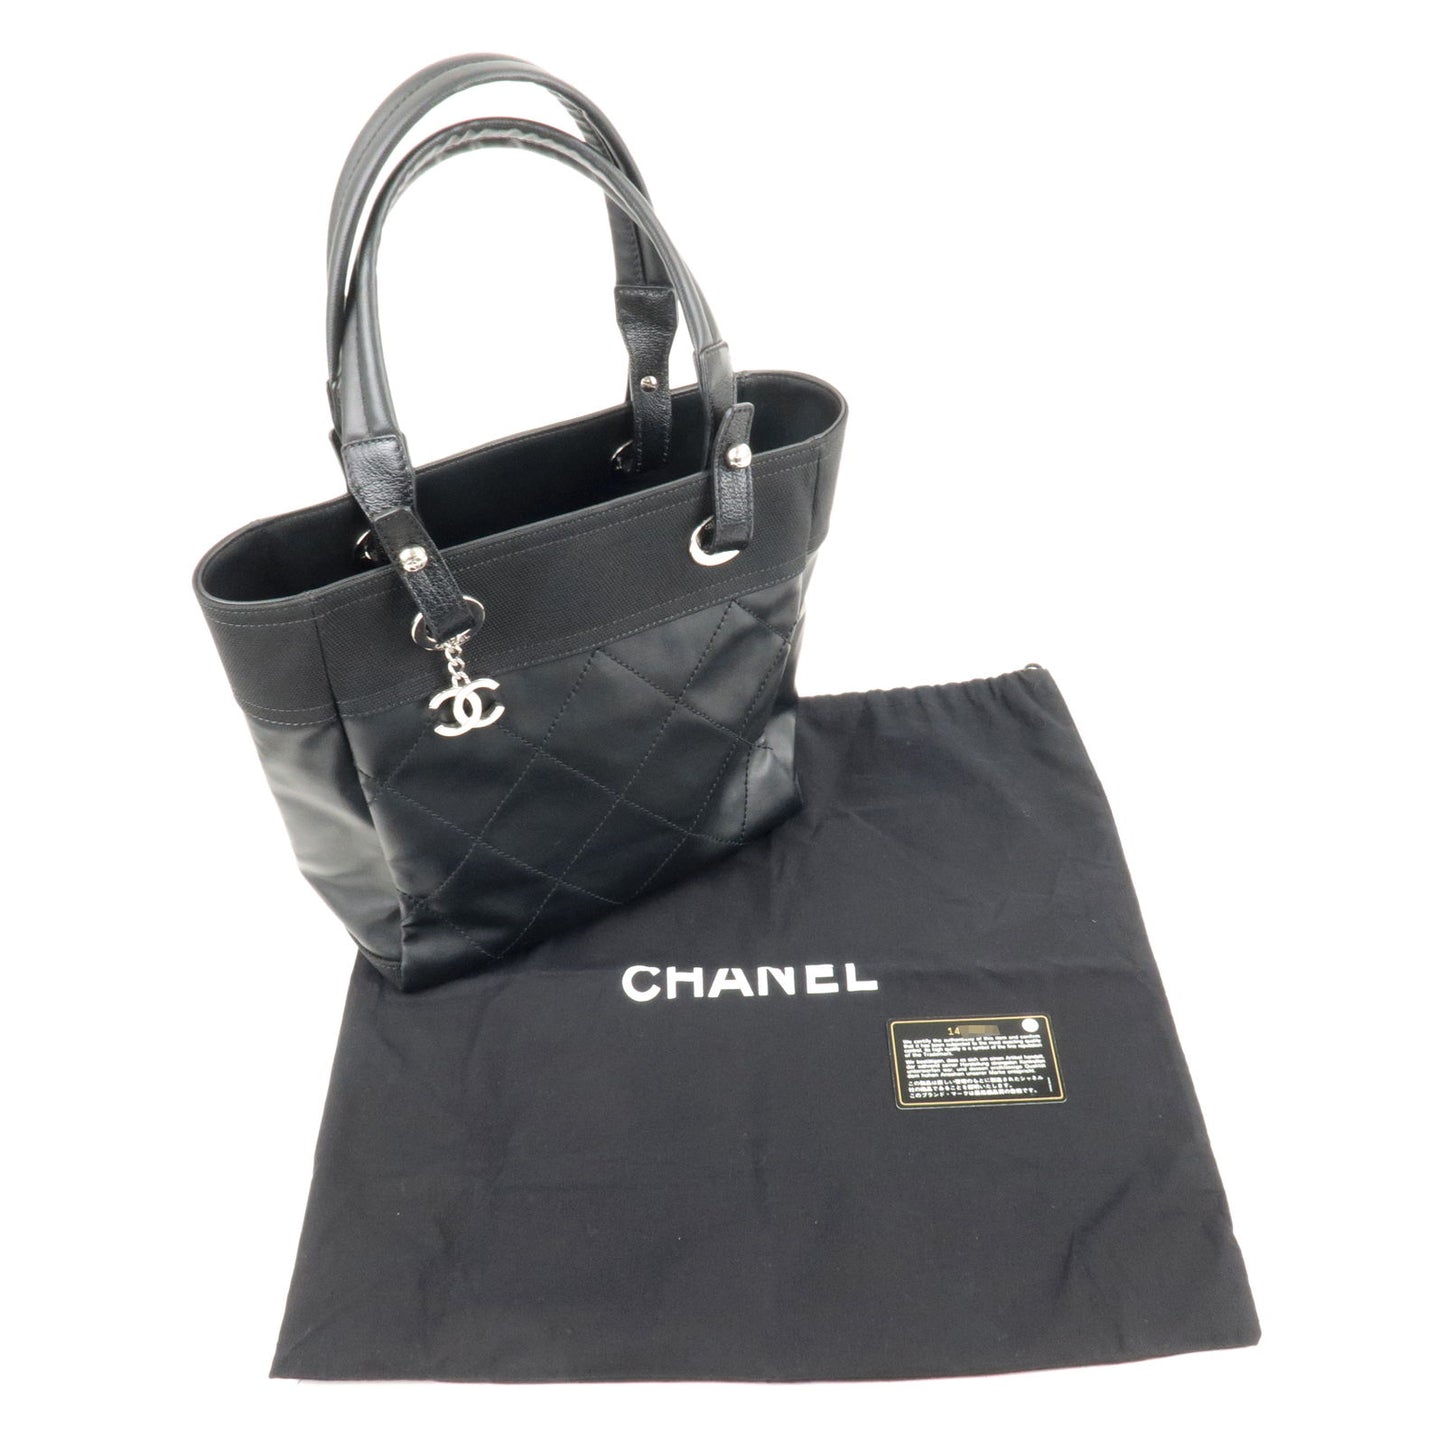 CHANEL Coated Canvas Leather Paris Biarritz PM Tote Bag A34208